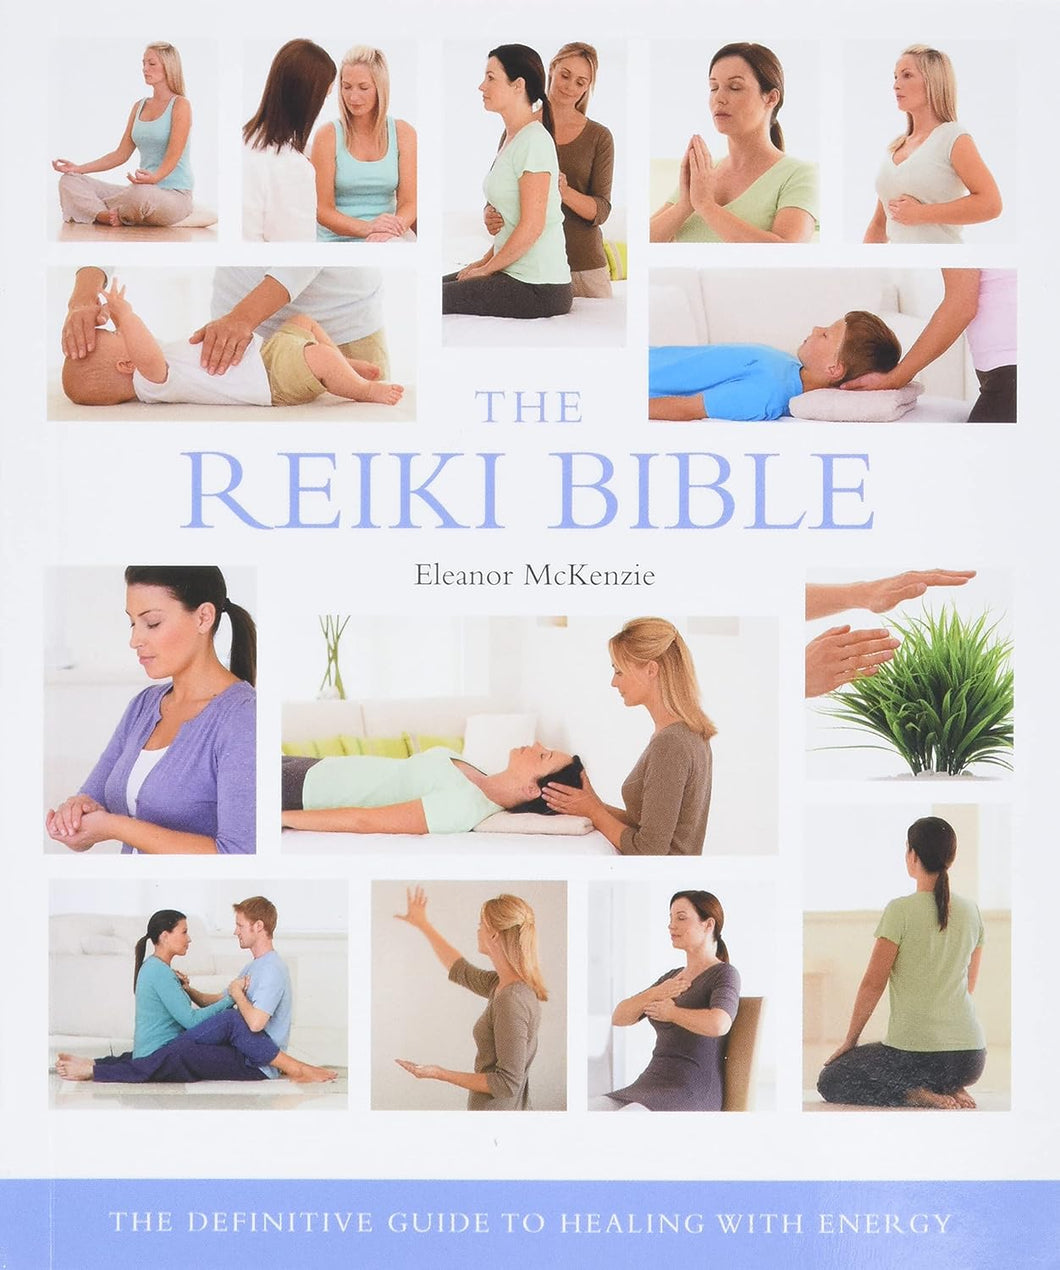 The Reiki Bible: The Definitive Guide to Healing with Energy